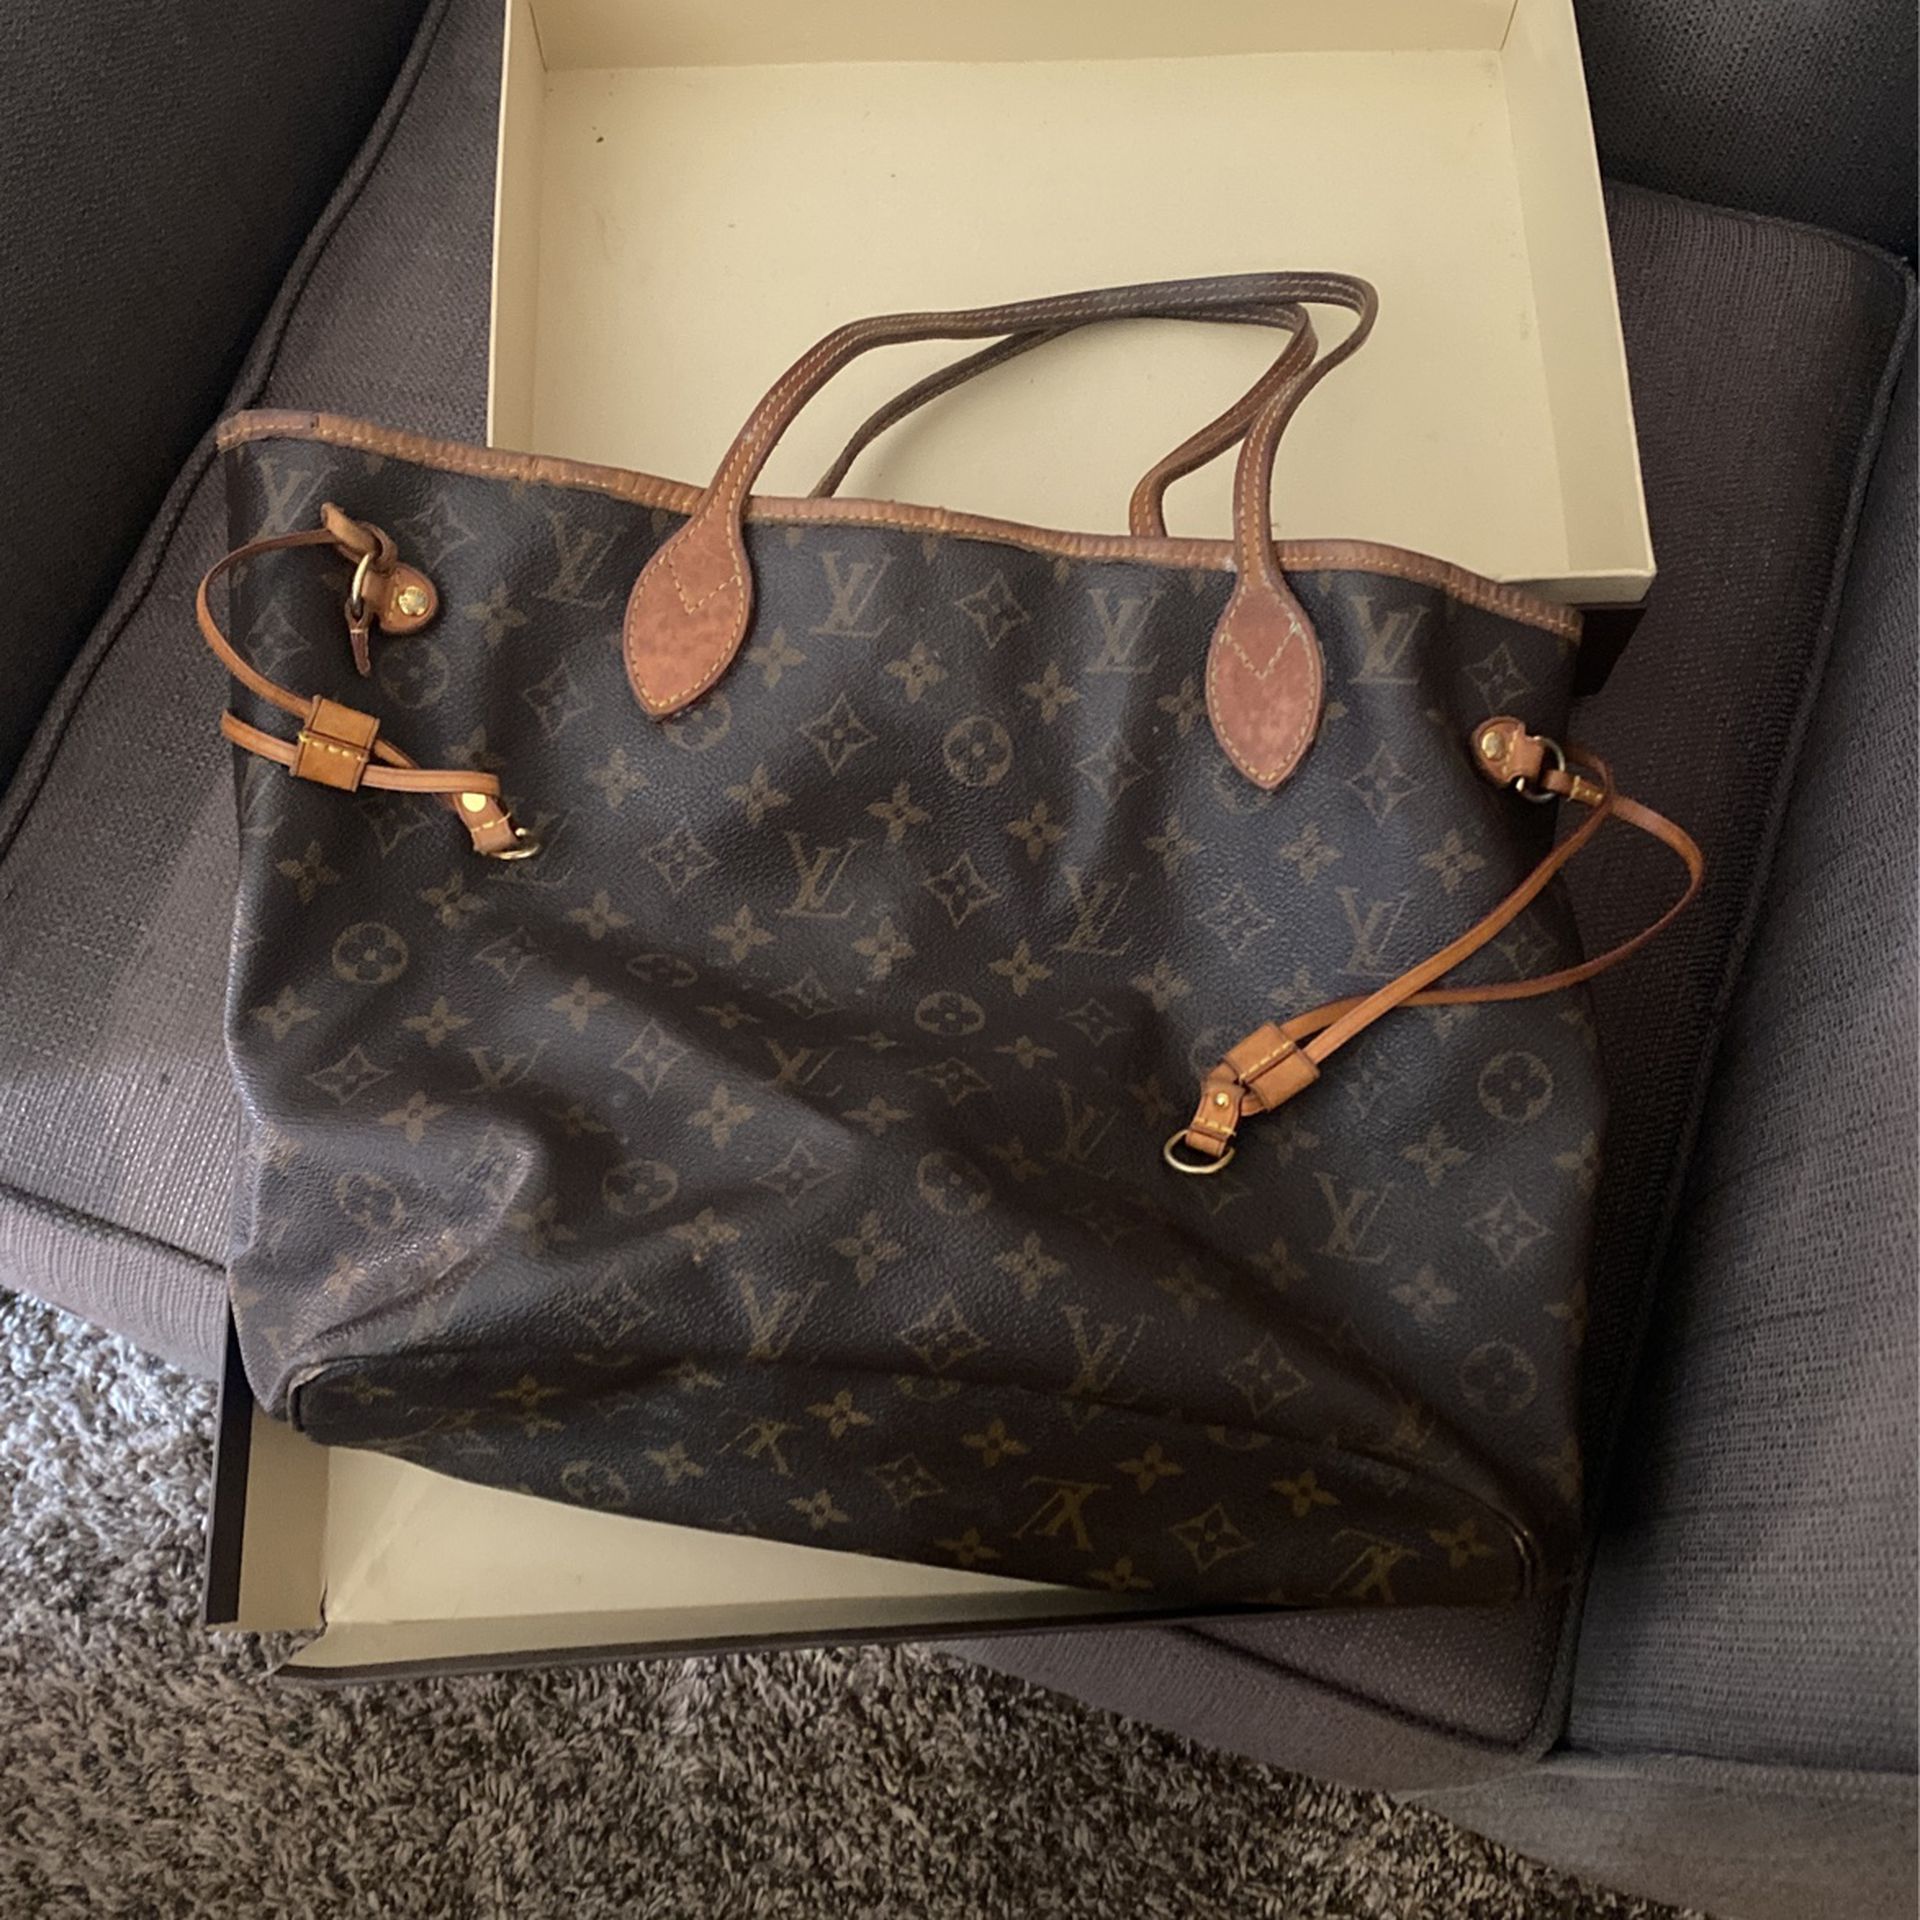 Sell Or Buy A Used Louis Vuitton